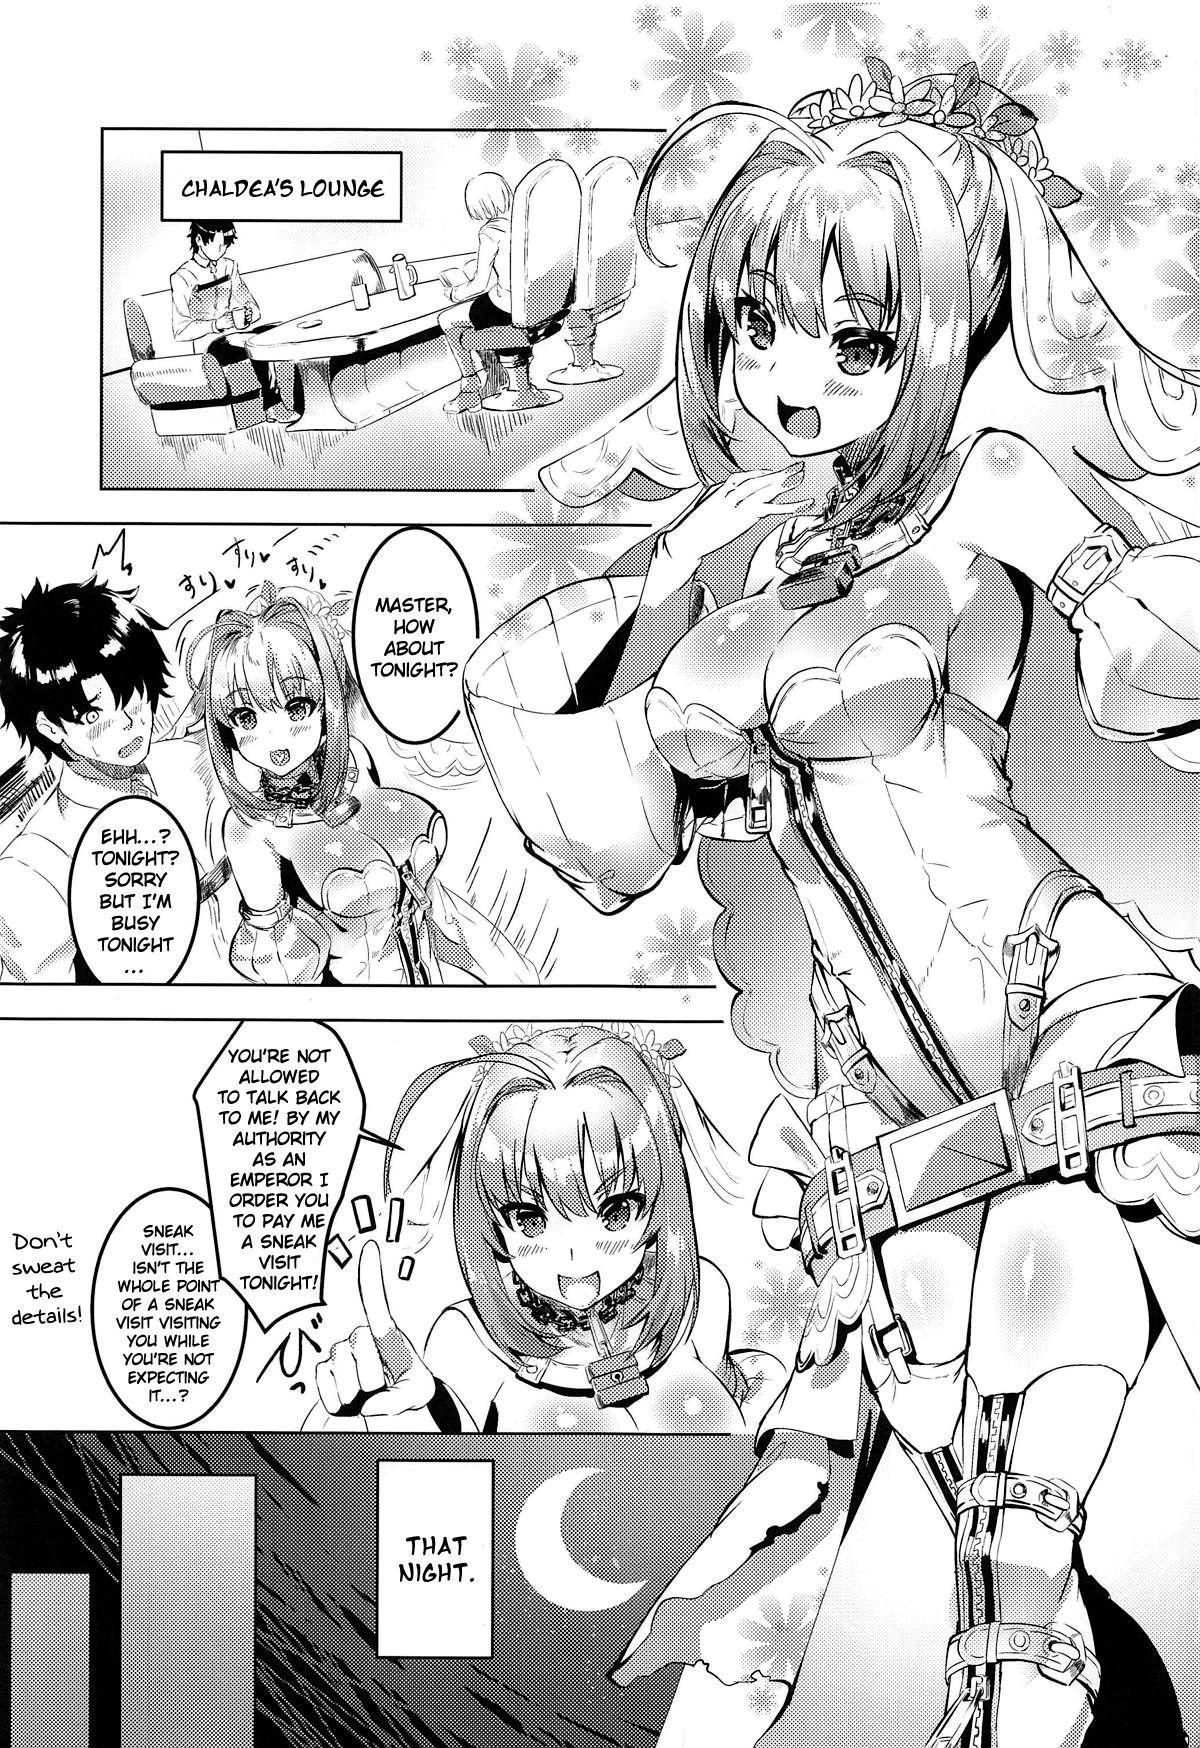 Nalgona Koutei to Oni no Erohon | An Ero Book About an Emperor and an Oni - Fate grand order Jerking - Page 2